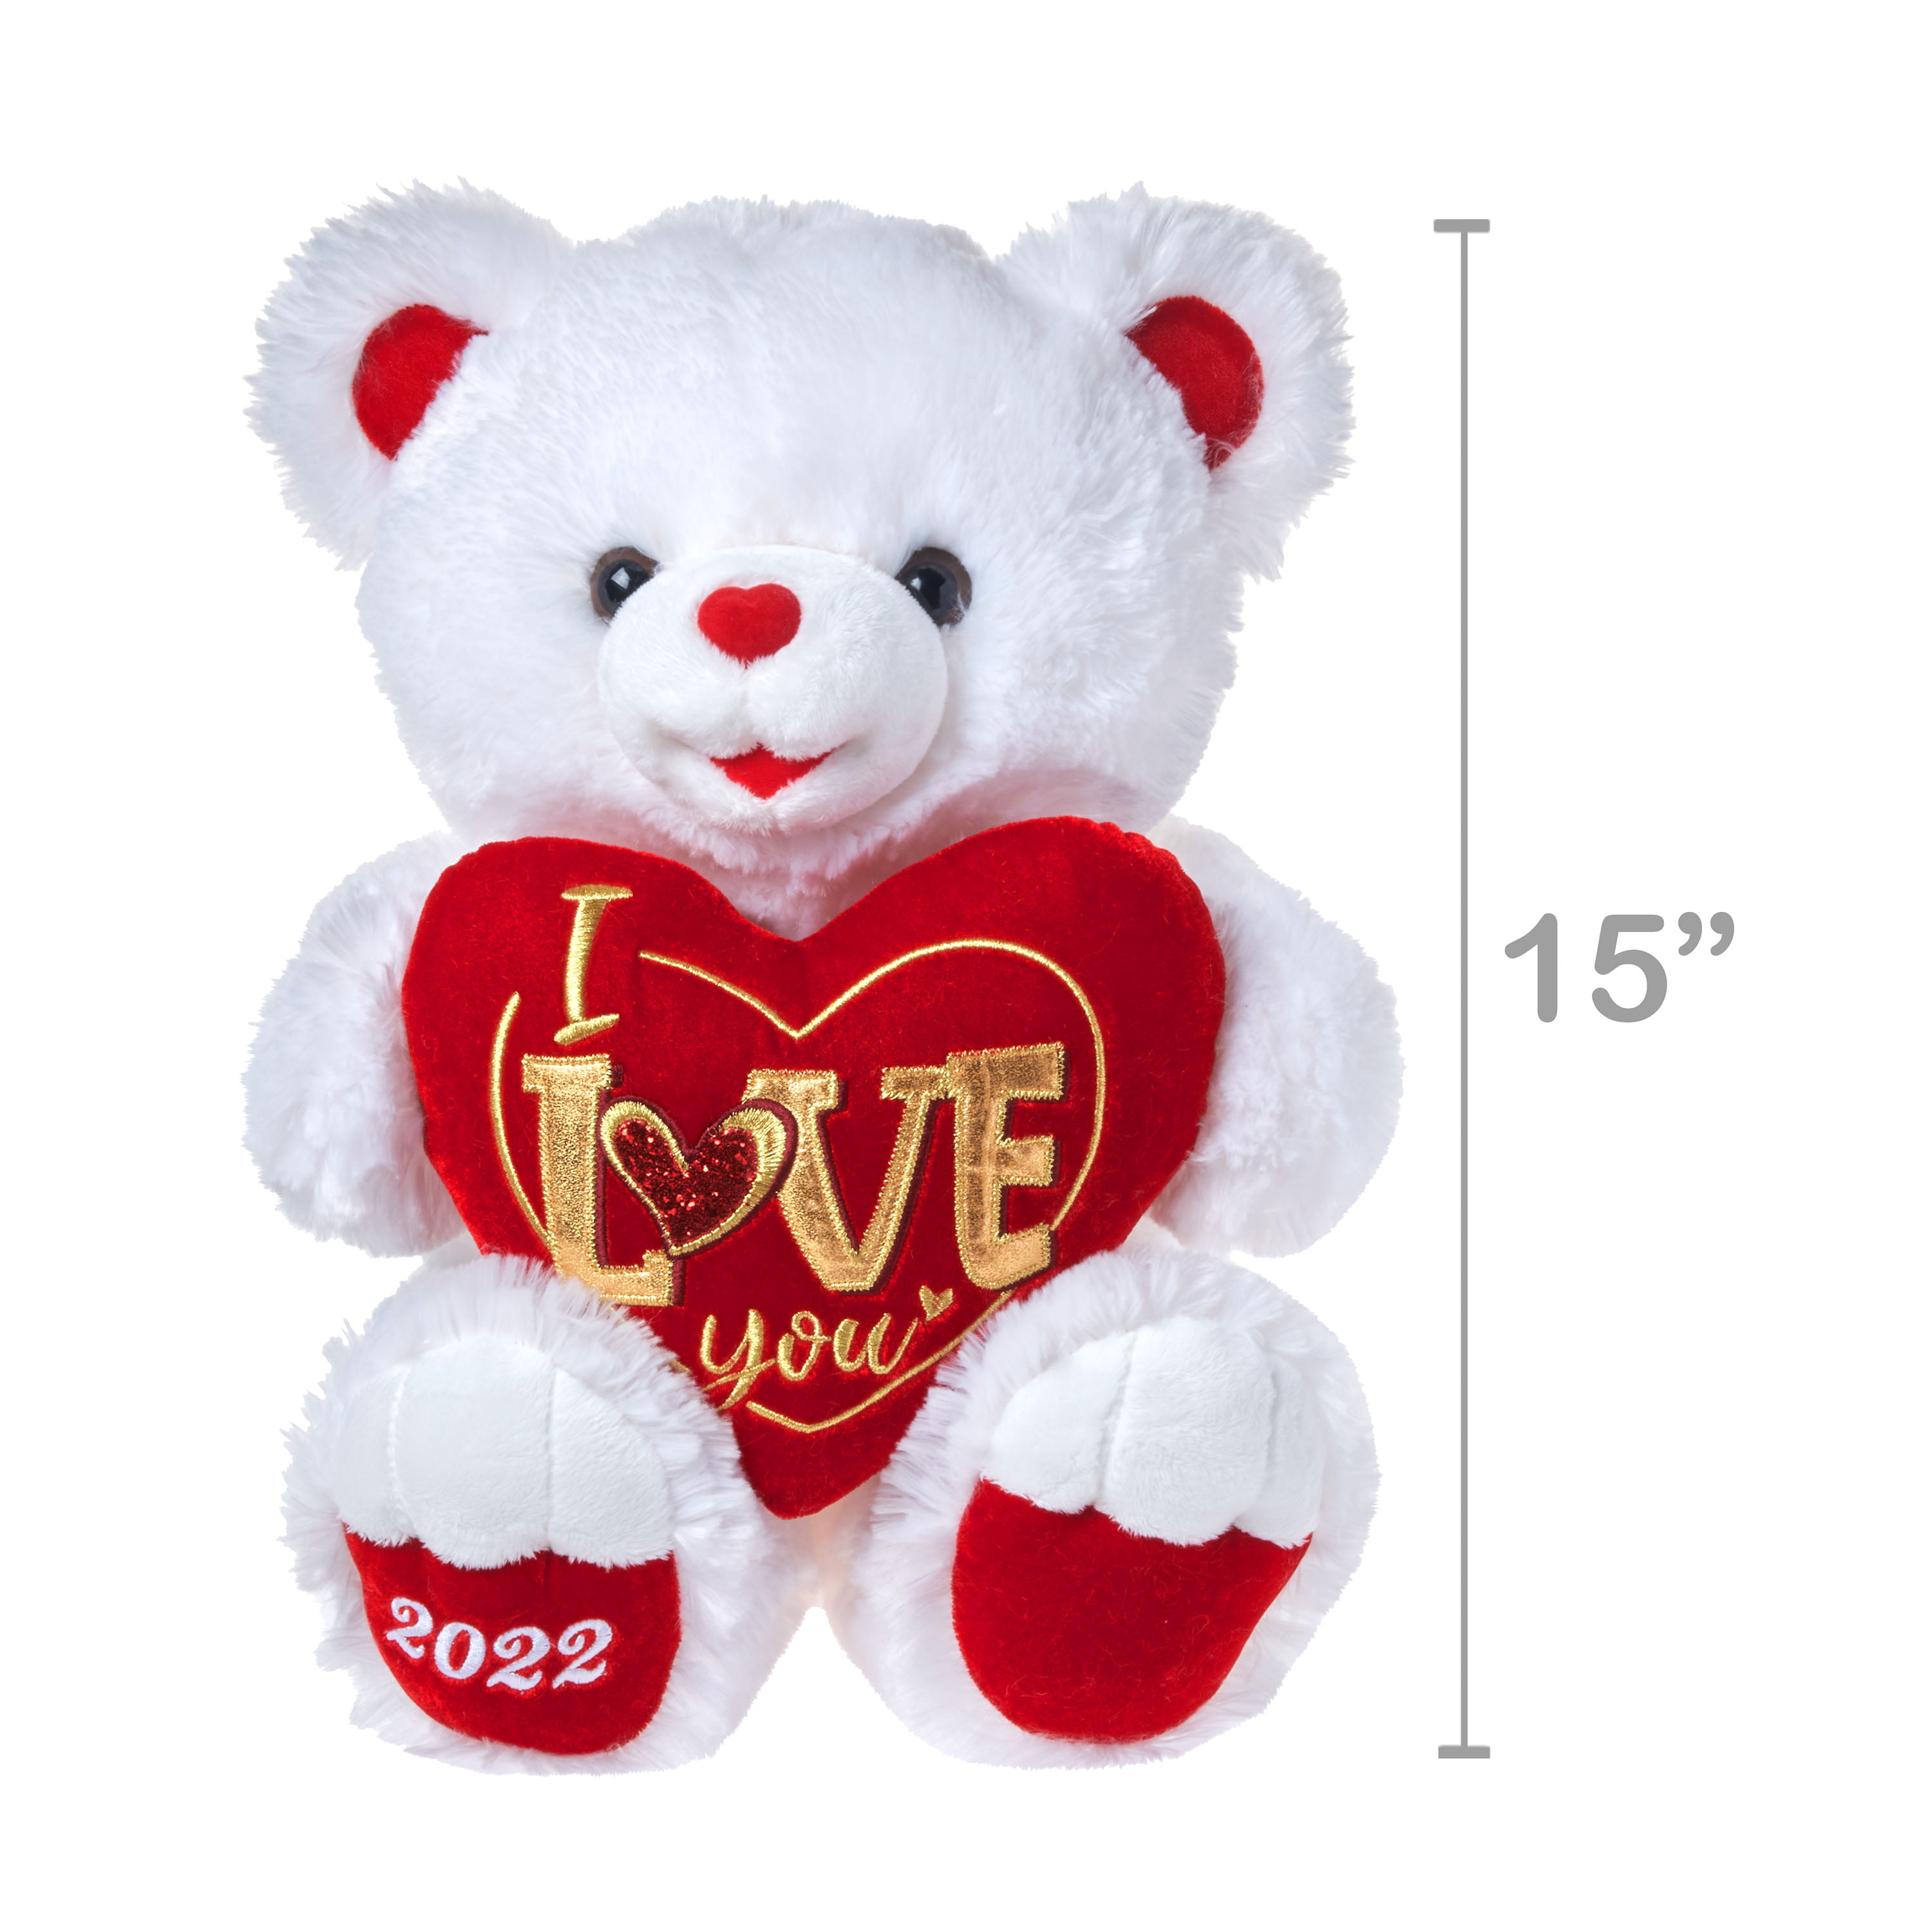 Mother Day Gift 10" Teddy Bear Plush w/ MUSIC "I LOVE YOU" in RED New! 